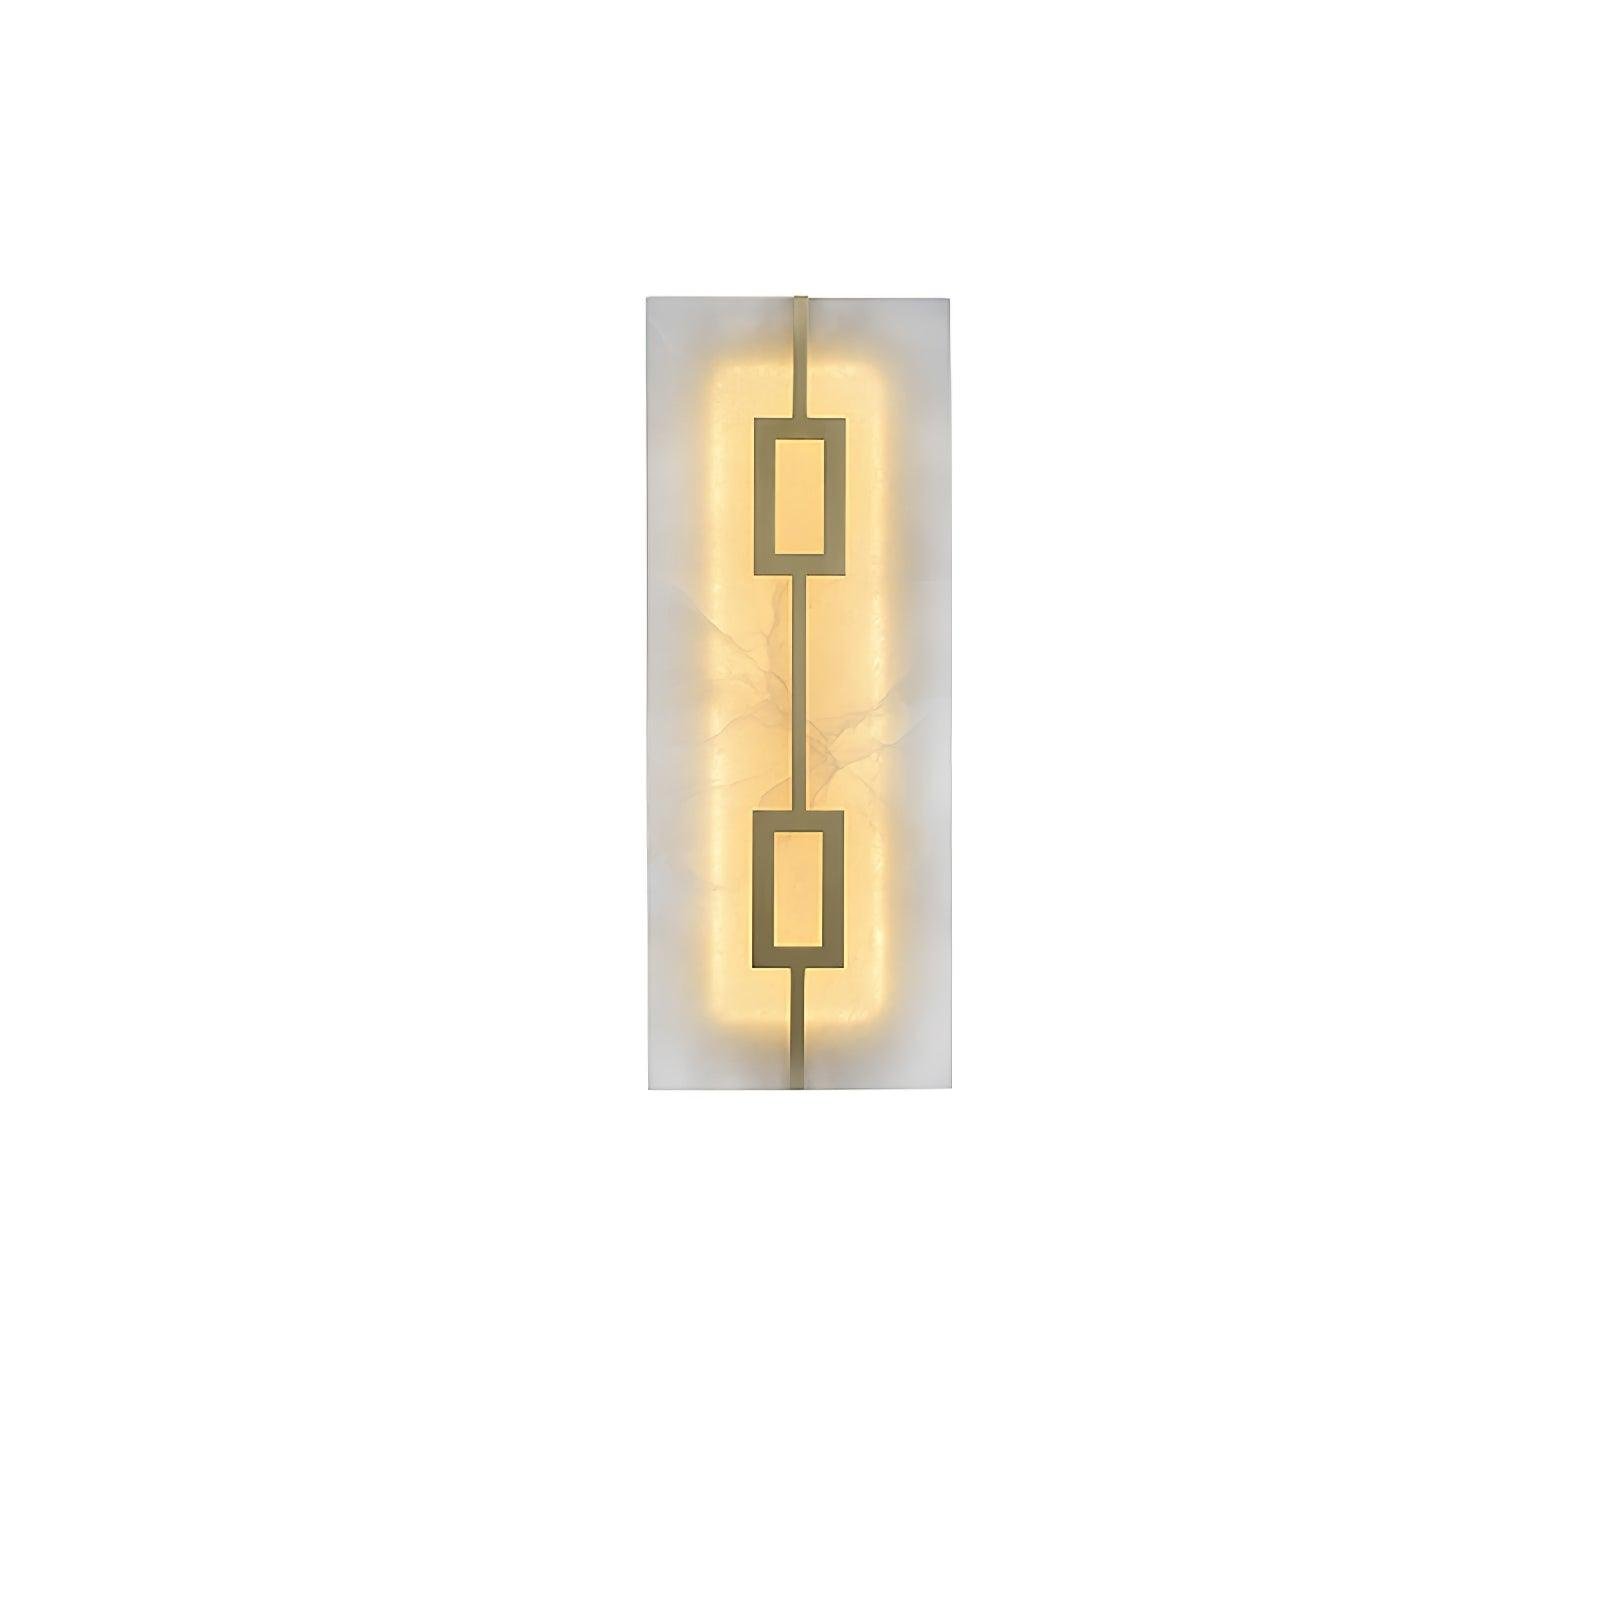 Marble Wall Lamp with Square Design, Dimensions 4.9″ x 16.7″ (12.5cm x 42.5cm), in Brass and White, Emitting Cool Light